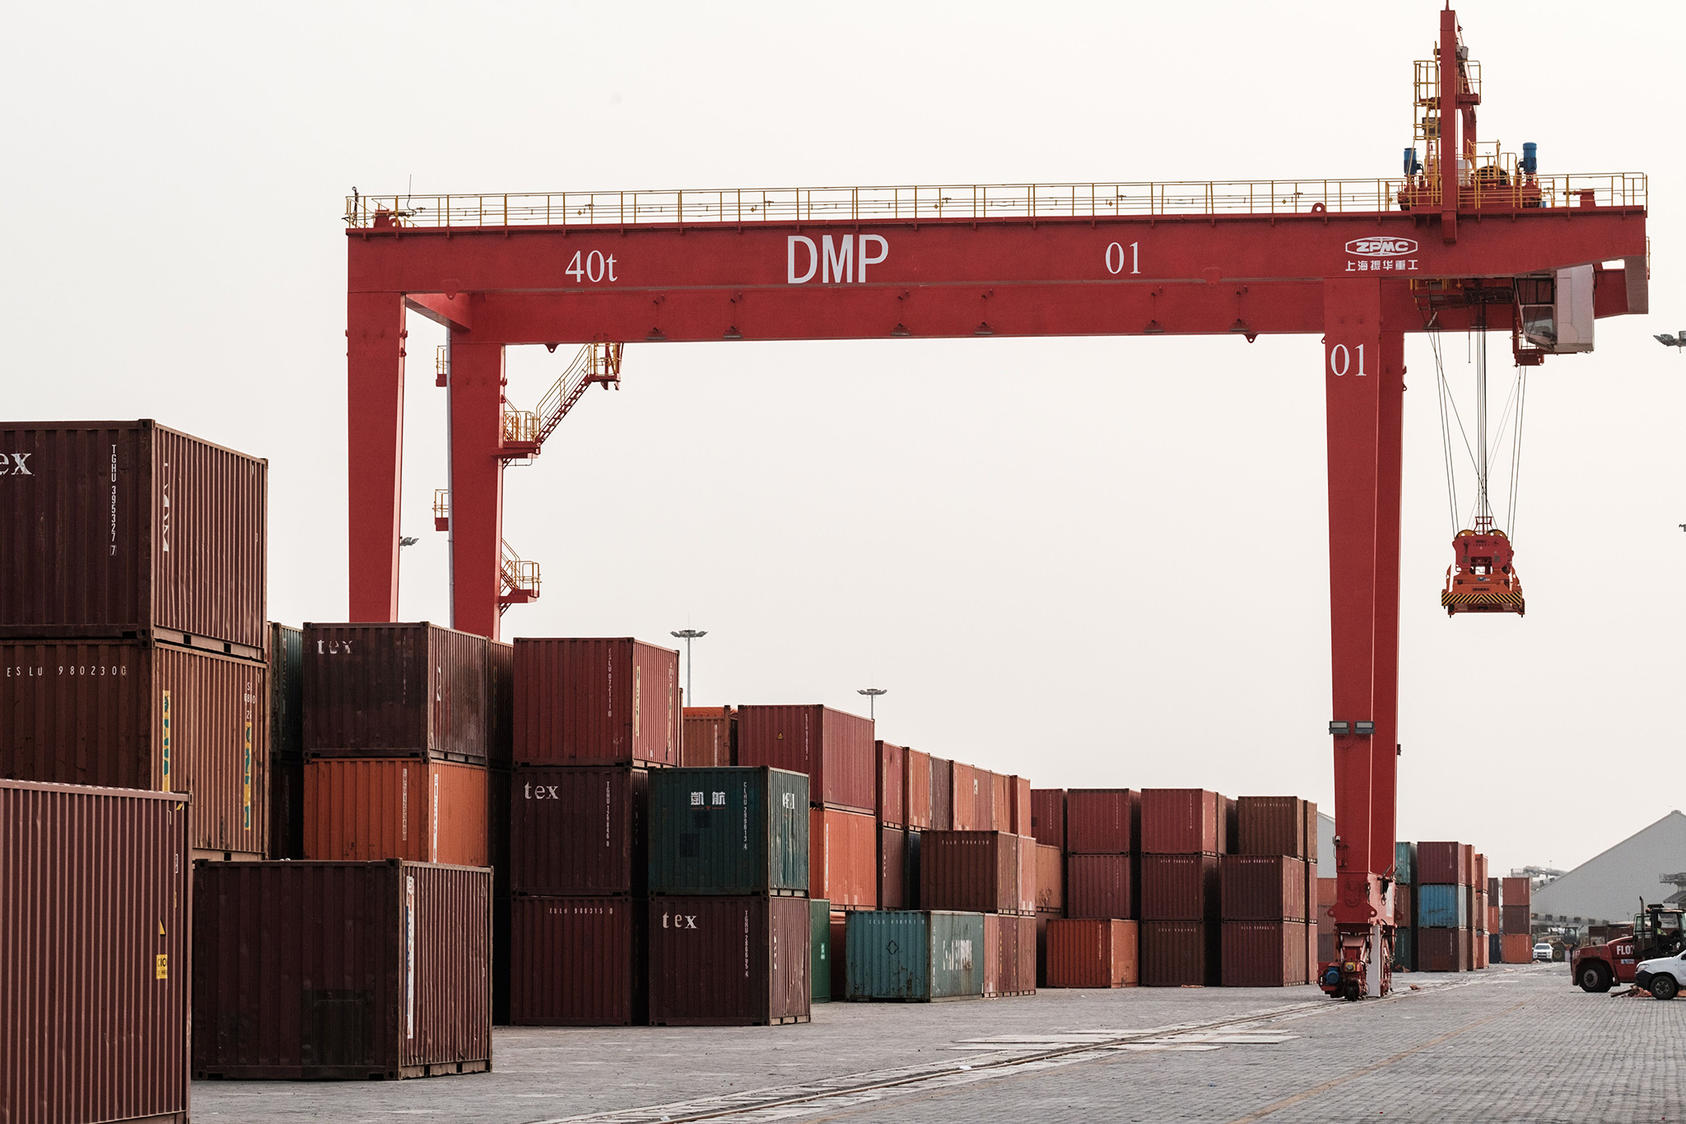 The Doraleh Multi-Purpose Port, which was financed and built in part by China Merchants Port Holdings and sits adjacent to a Chinese naval base, demonstrates the nexus of China's commercial and security interests in Djibouti. (Photo by Yasuyoshi Chiba/AFP/Getty Images)